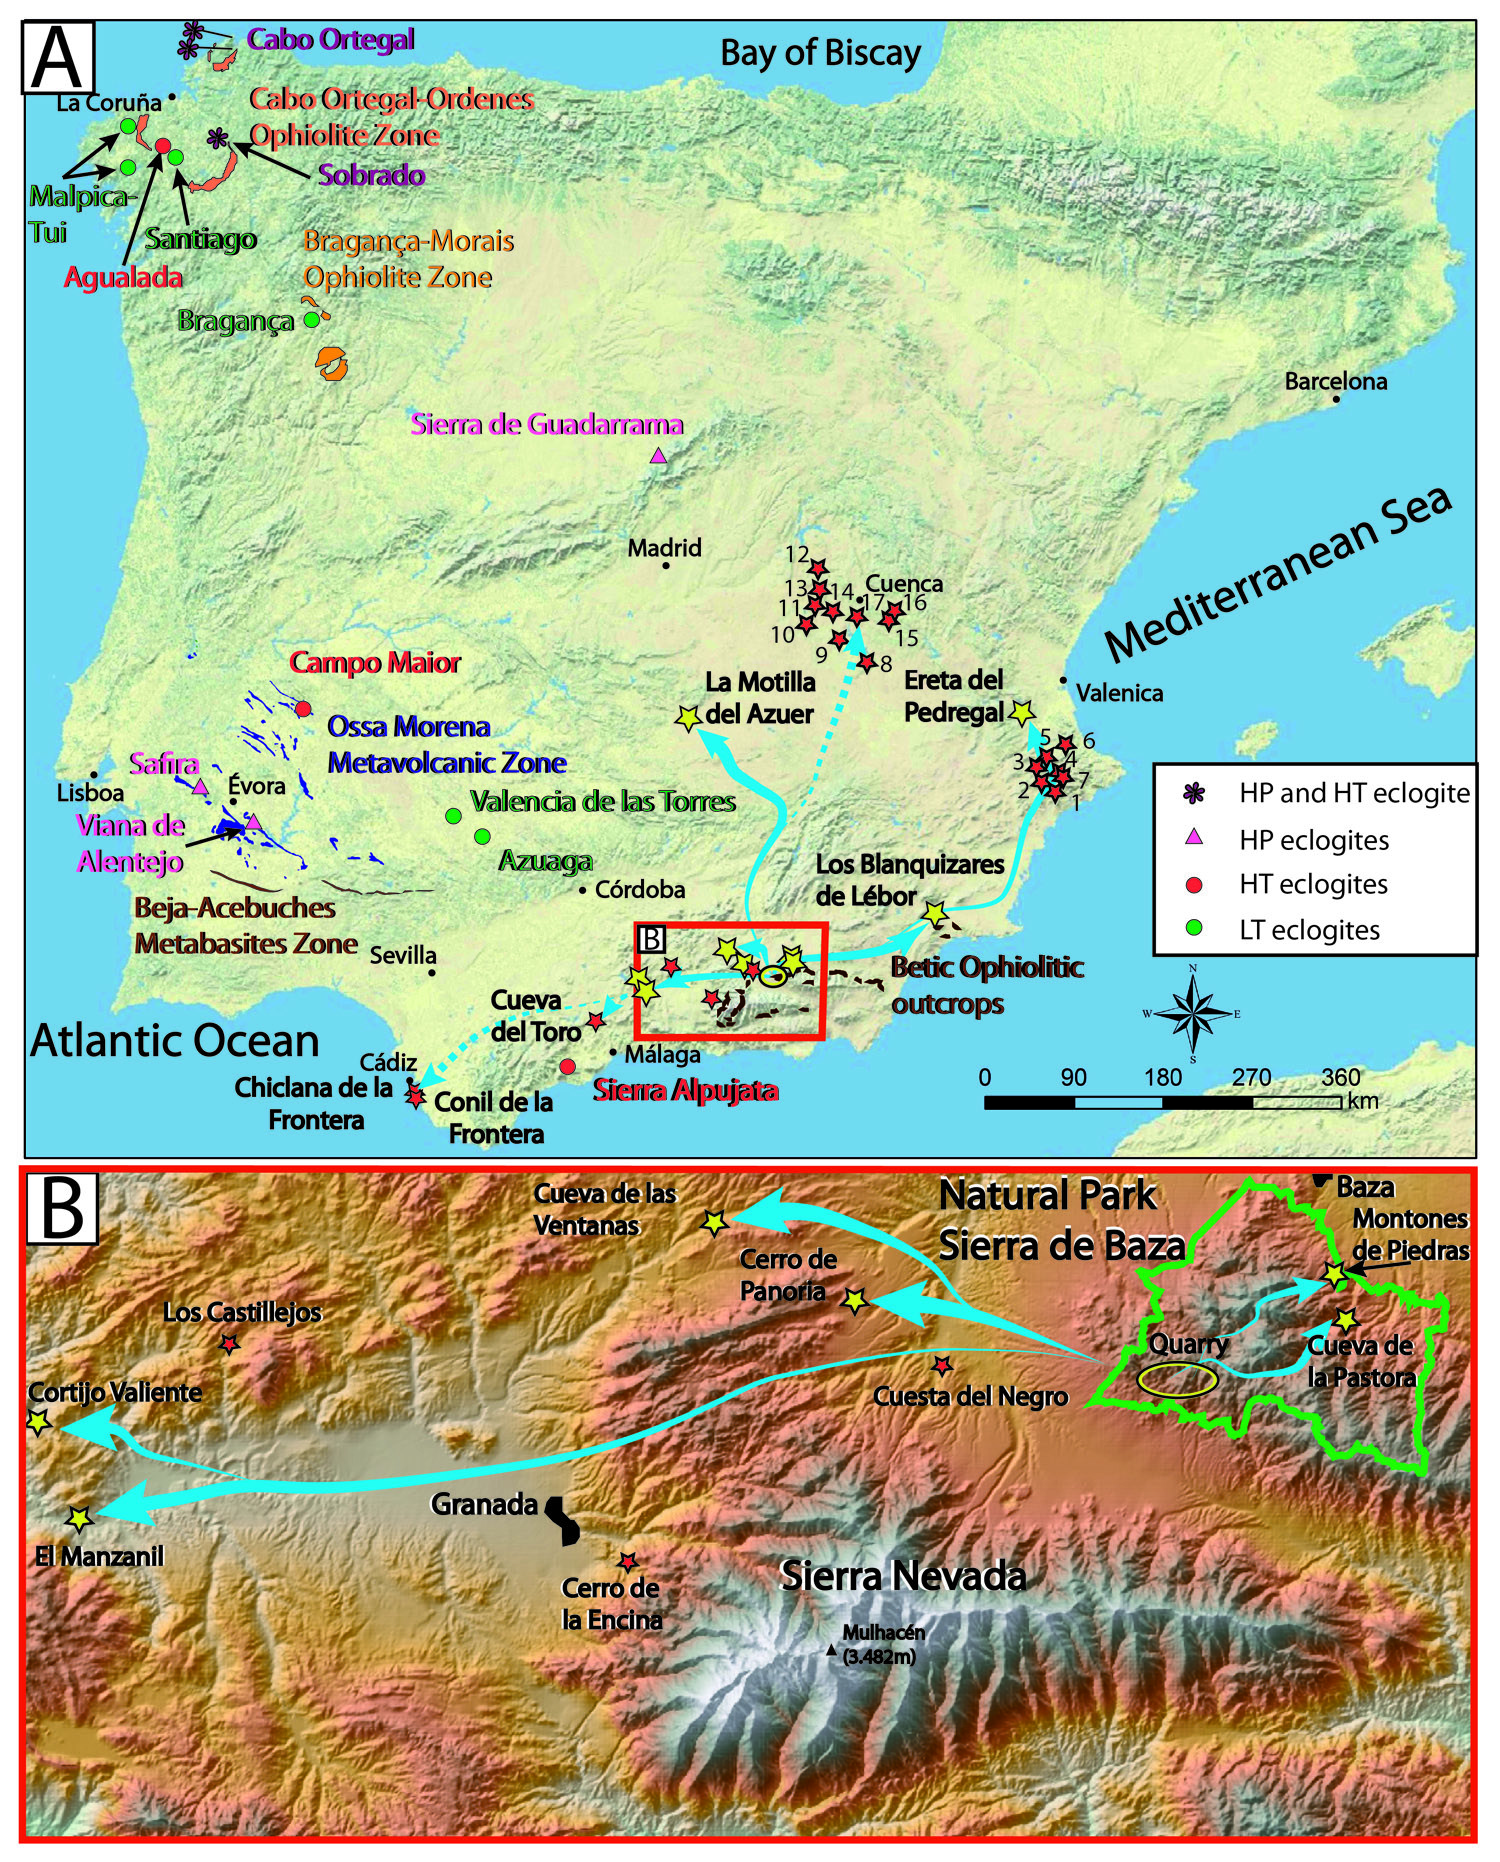 A map of Spain and the Sierra Nevada mountain range